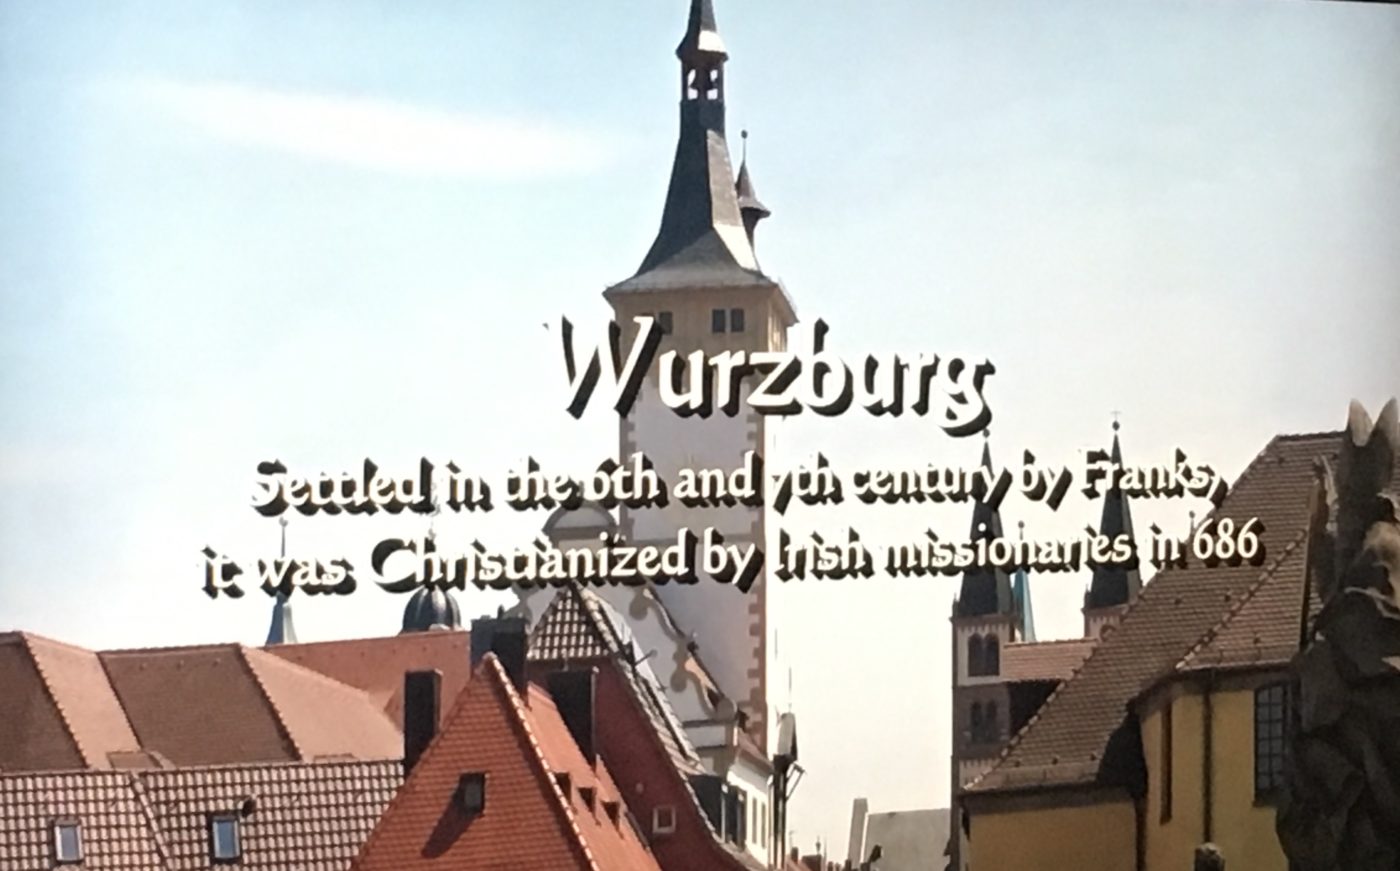 Wurzburg, Germany settled in 6th century and Chrisitanized in 686